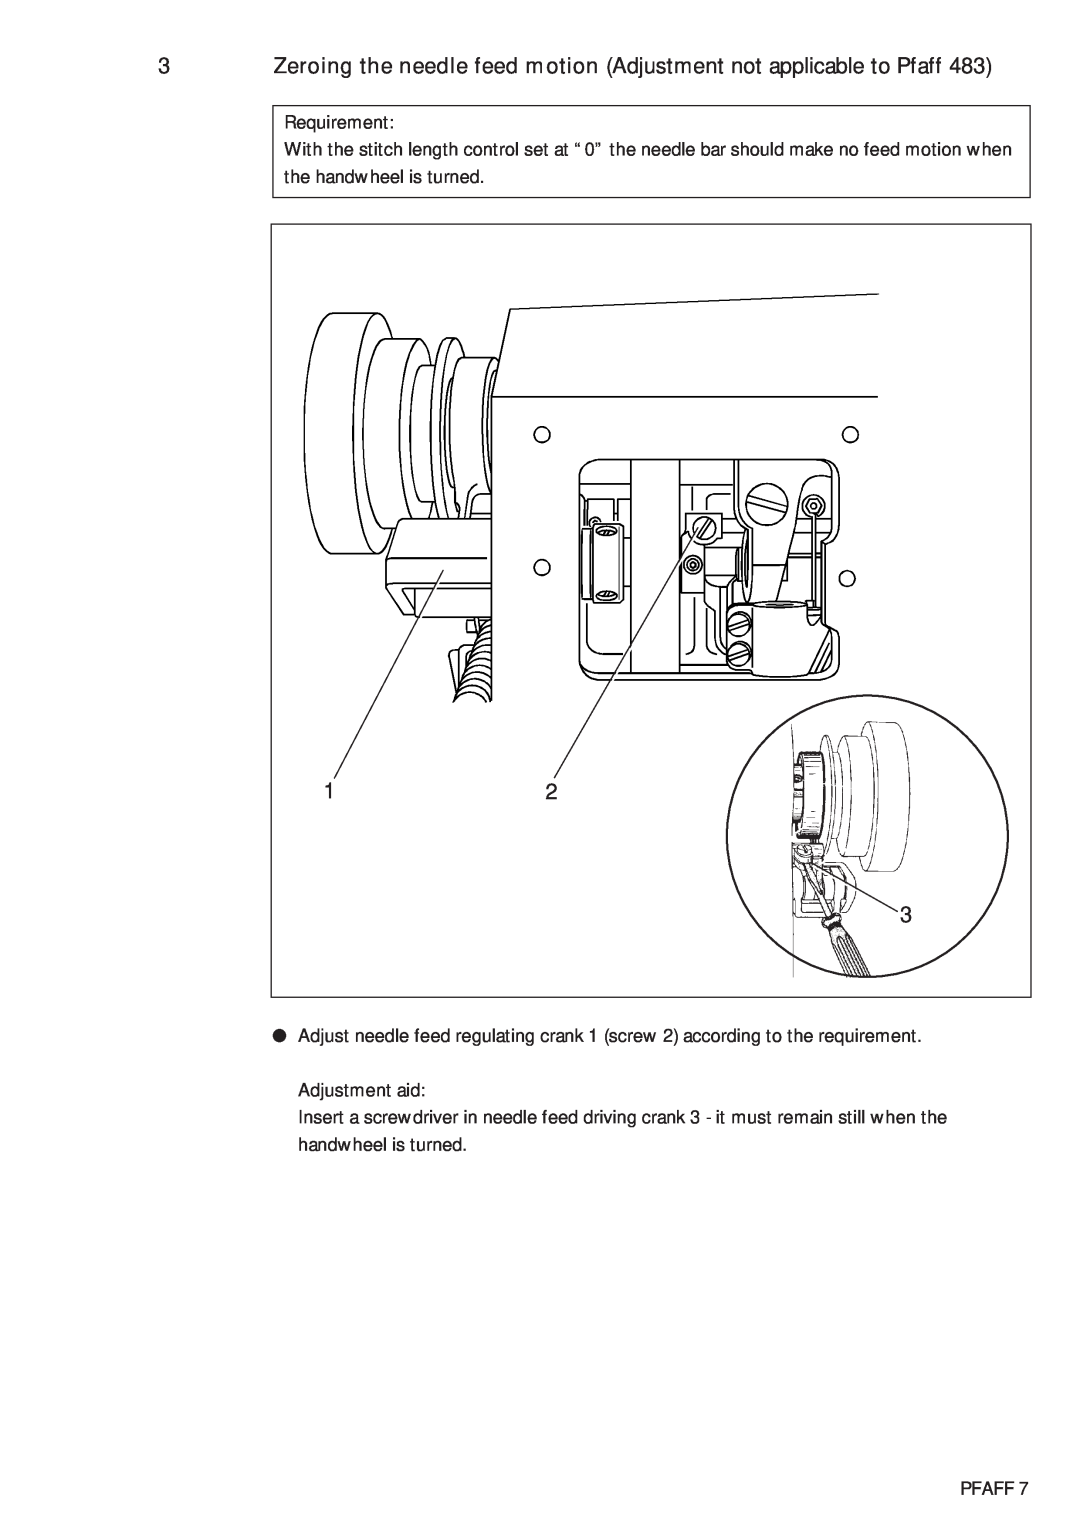 Pfaff 483, 481 service manual Zeroing the needle feed motion Adjustment not applicable to Pfaff, Requirement, Adjustment aid 